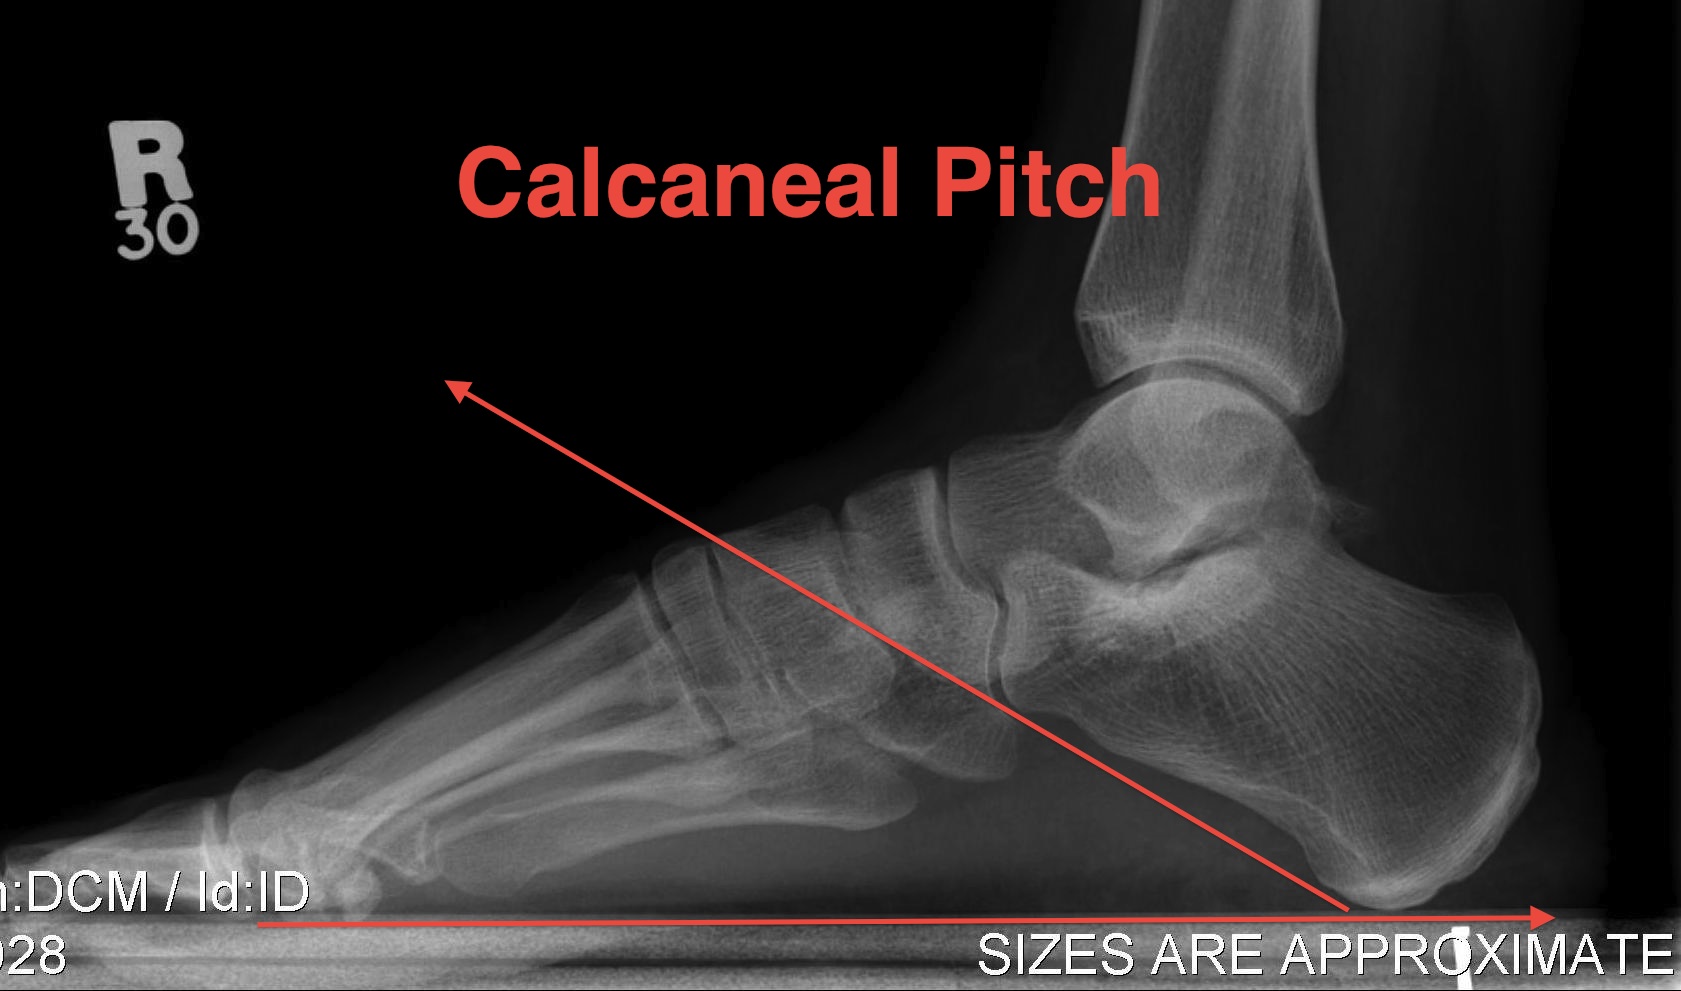 Calcaneal Pitch